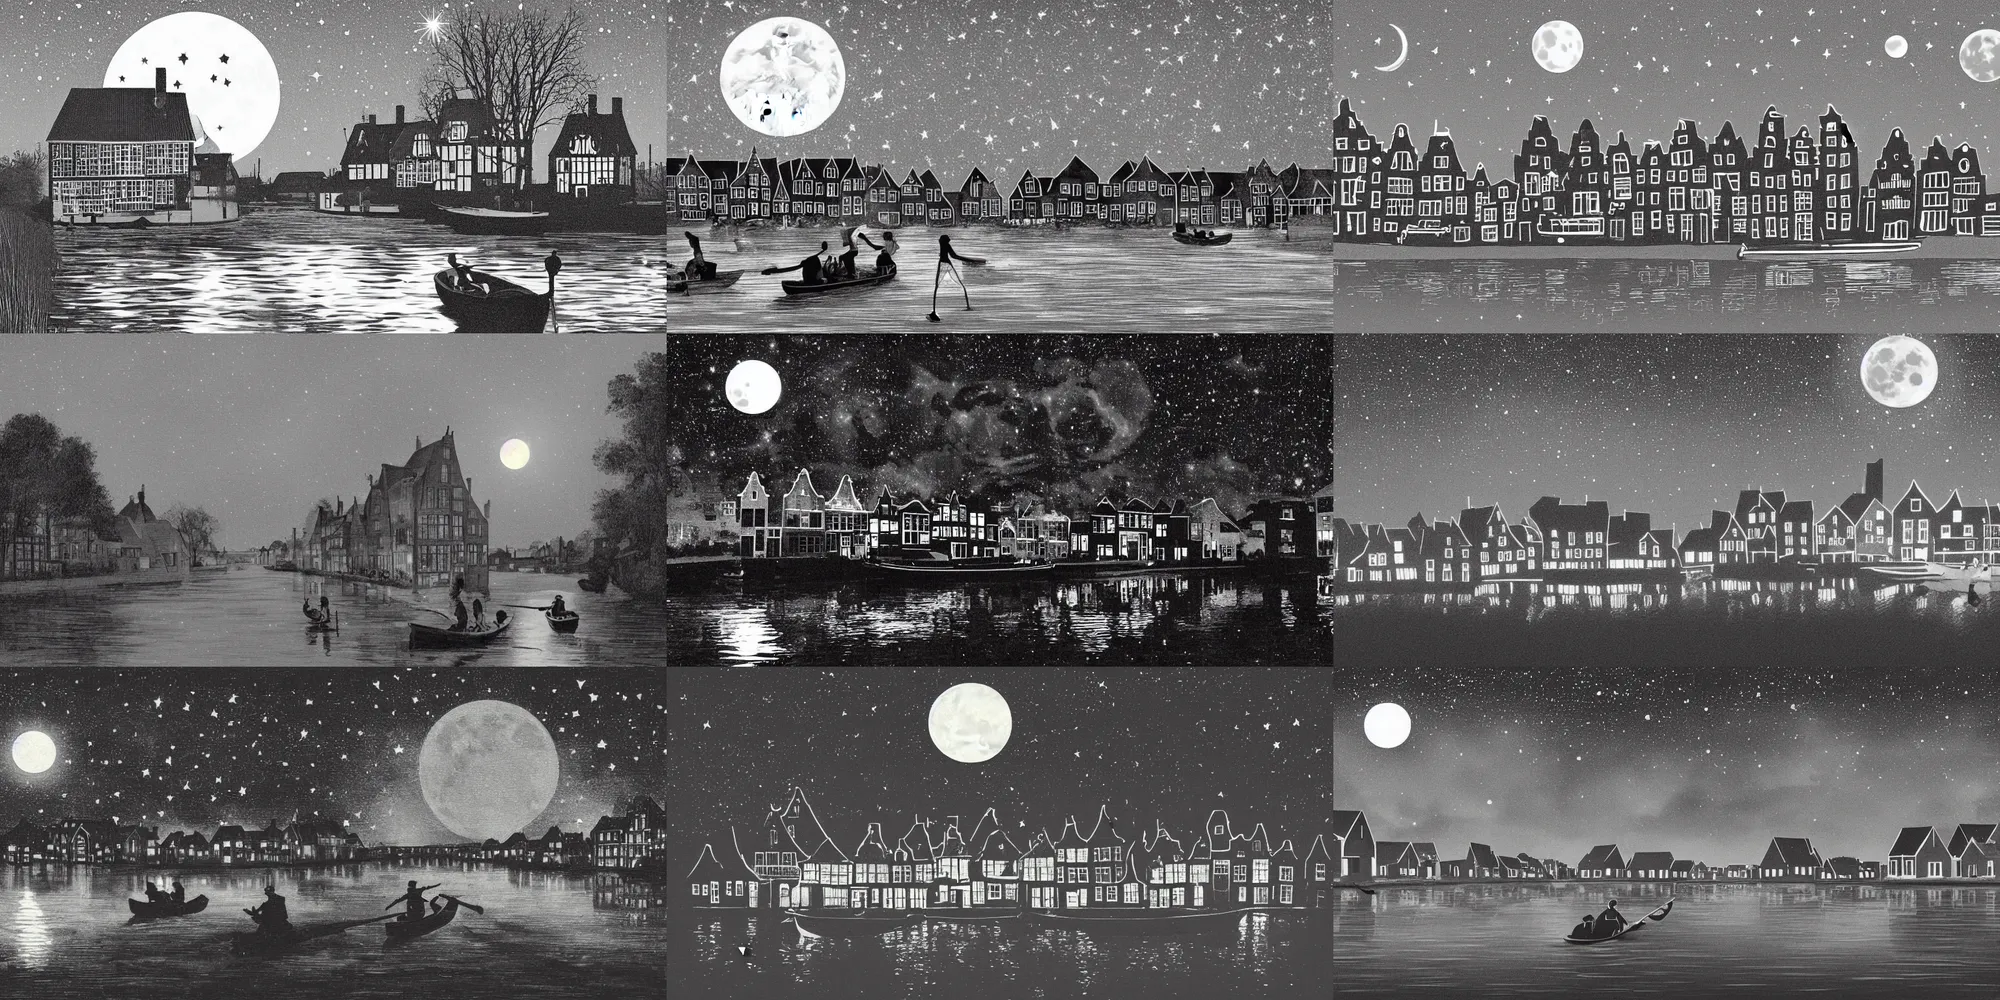 Prompt: Dutch houses along a river, silhouette!!!, Circular white full moon, black sky with stars, lit windows, stars in the sky, b&w!, Reflections on the river, a man is punting, flat!!, Front profile!!!!, Style of Frank Weston, illustration